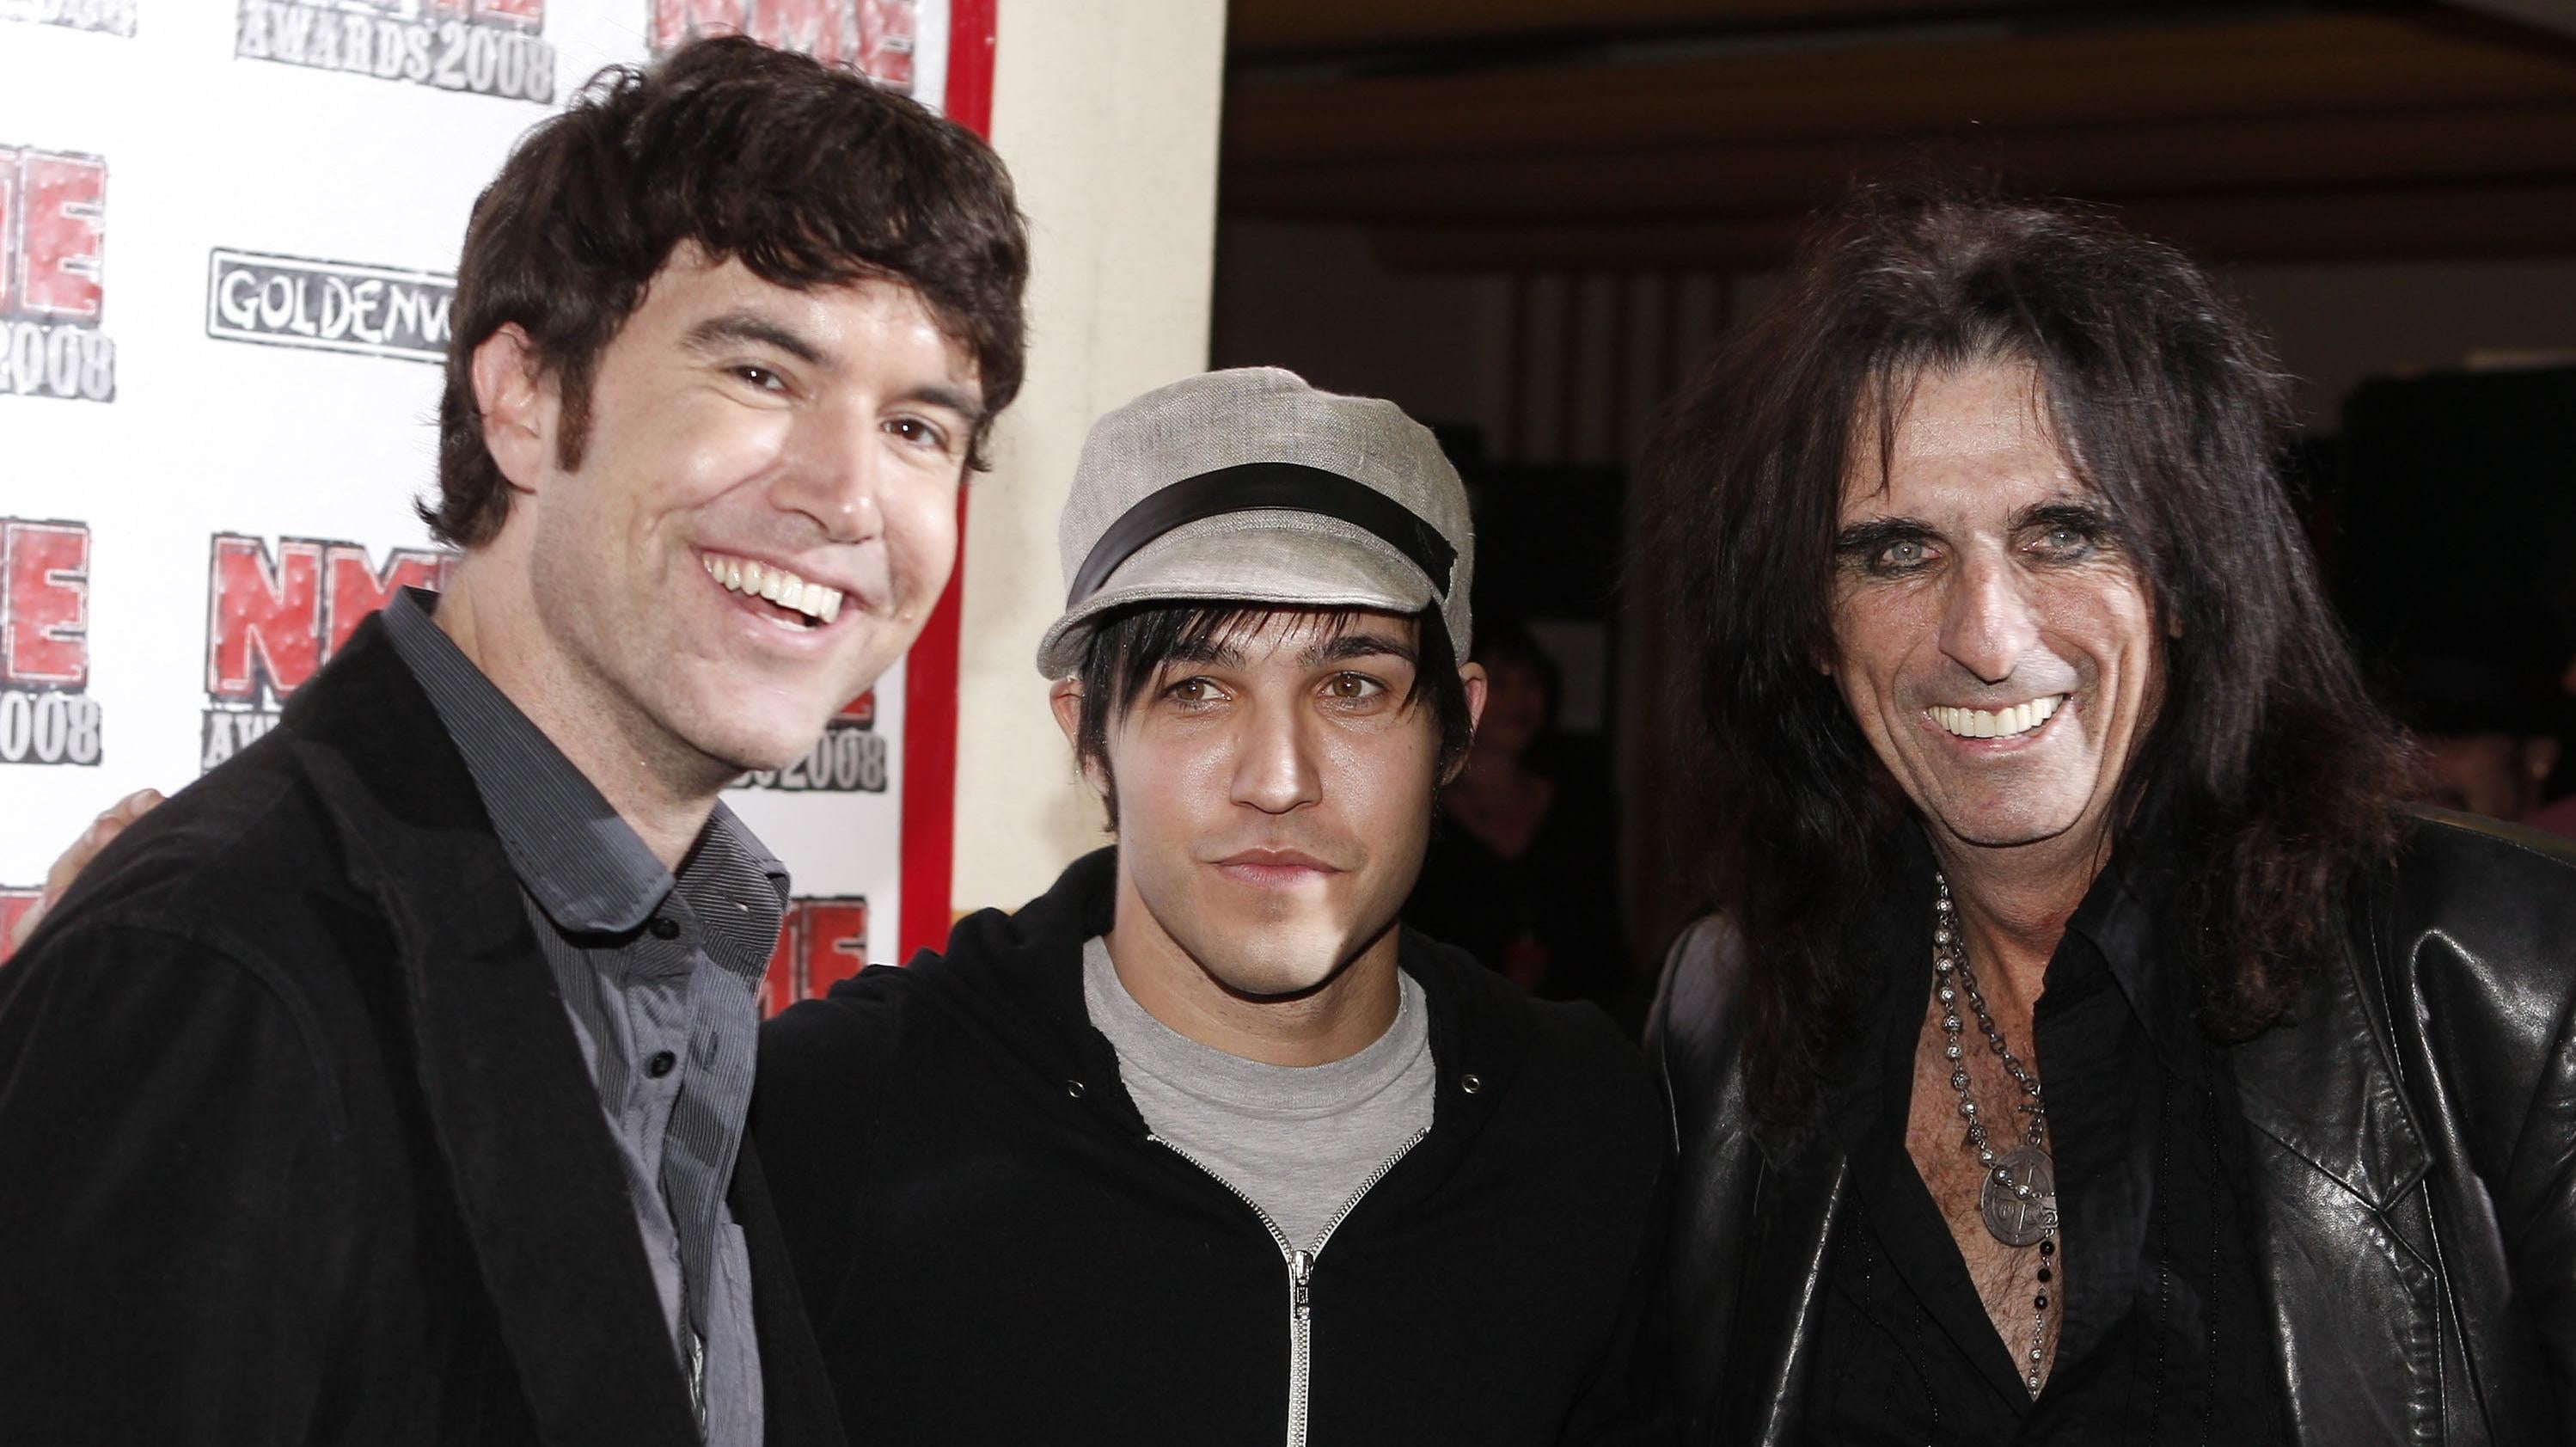 Believe it or not, more than one photo of MySpace Tom exists. Here he is with Fall Out Boy's Pete Wentz and Alice Cooper in 2008. (Photo: Getty, Getty Images)